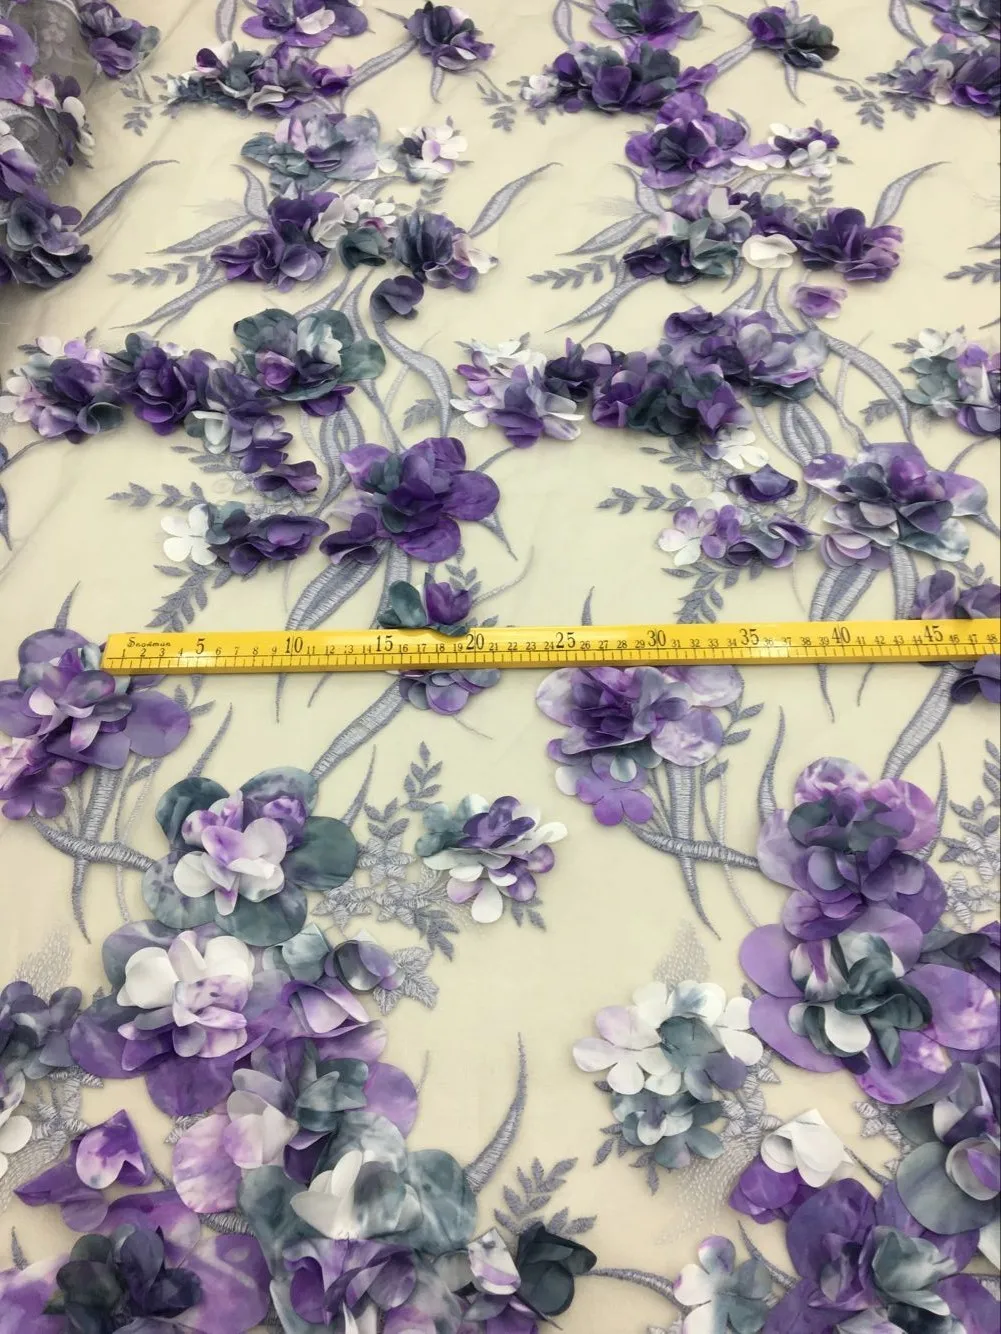 3D Flowers Applique Lace Fabric. High Quality 3D Lace Fabric For Haute Couture Fashion Dress Prom Dress Lace Fabric